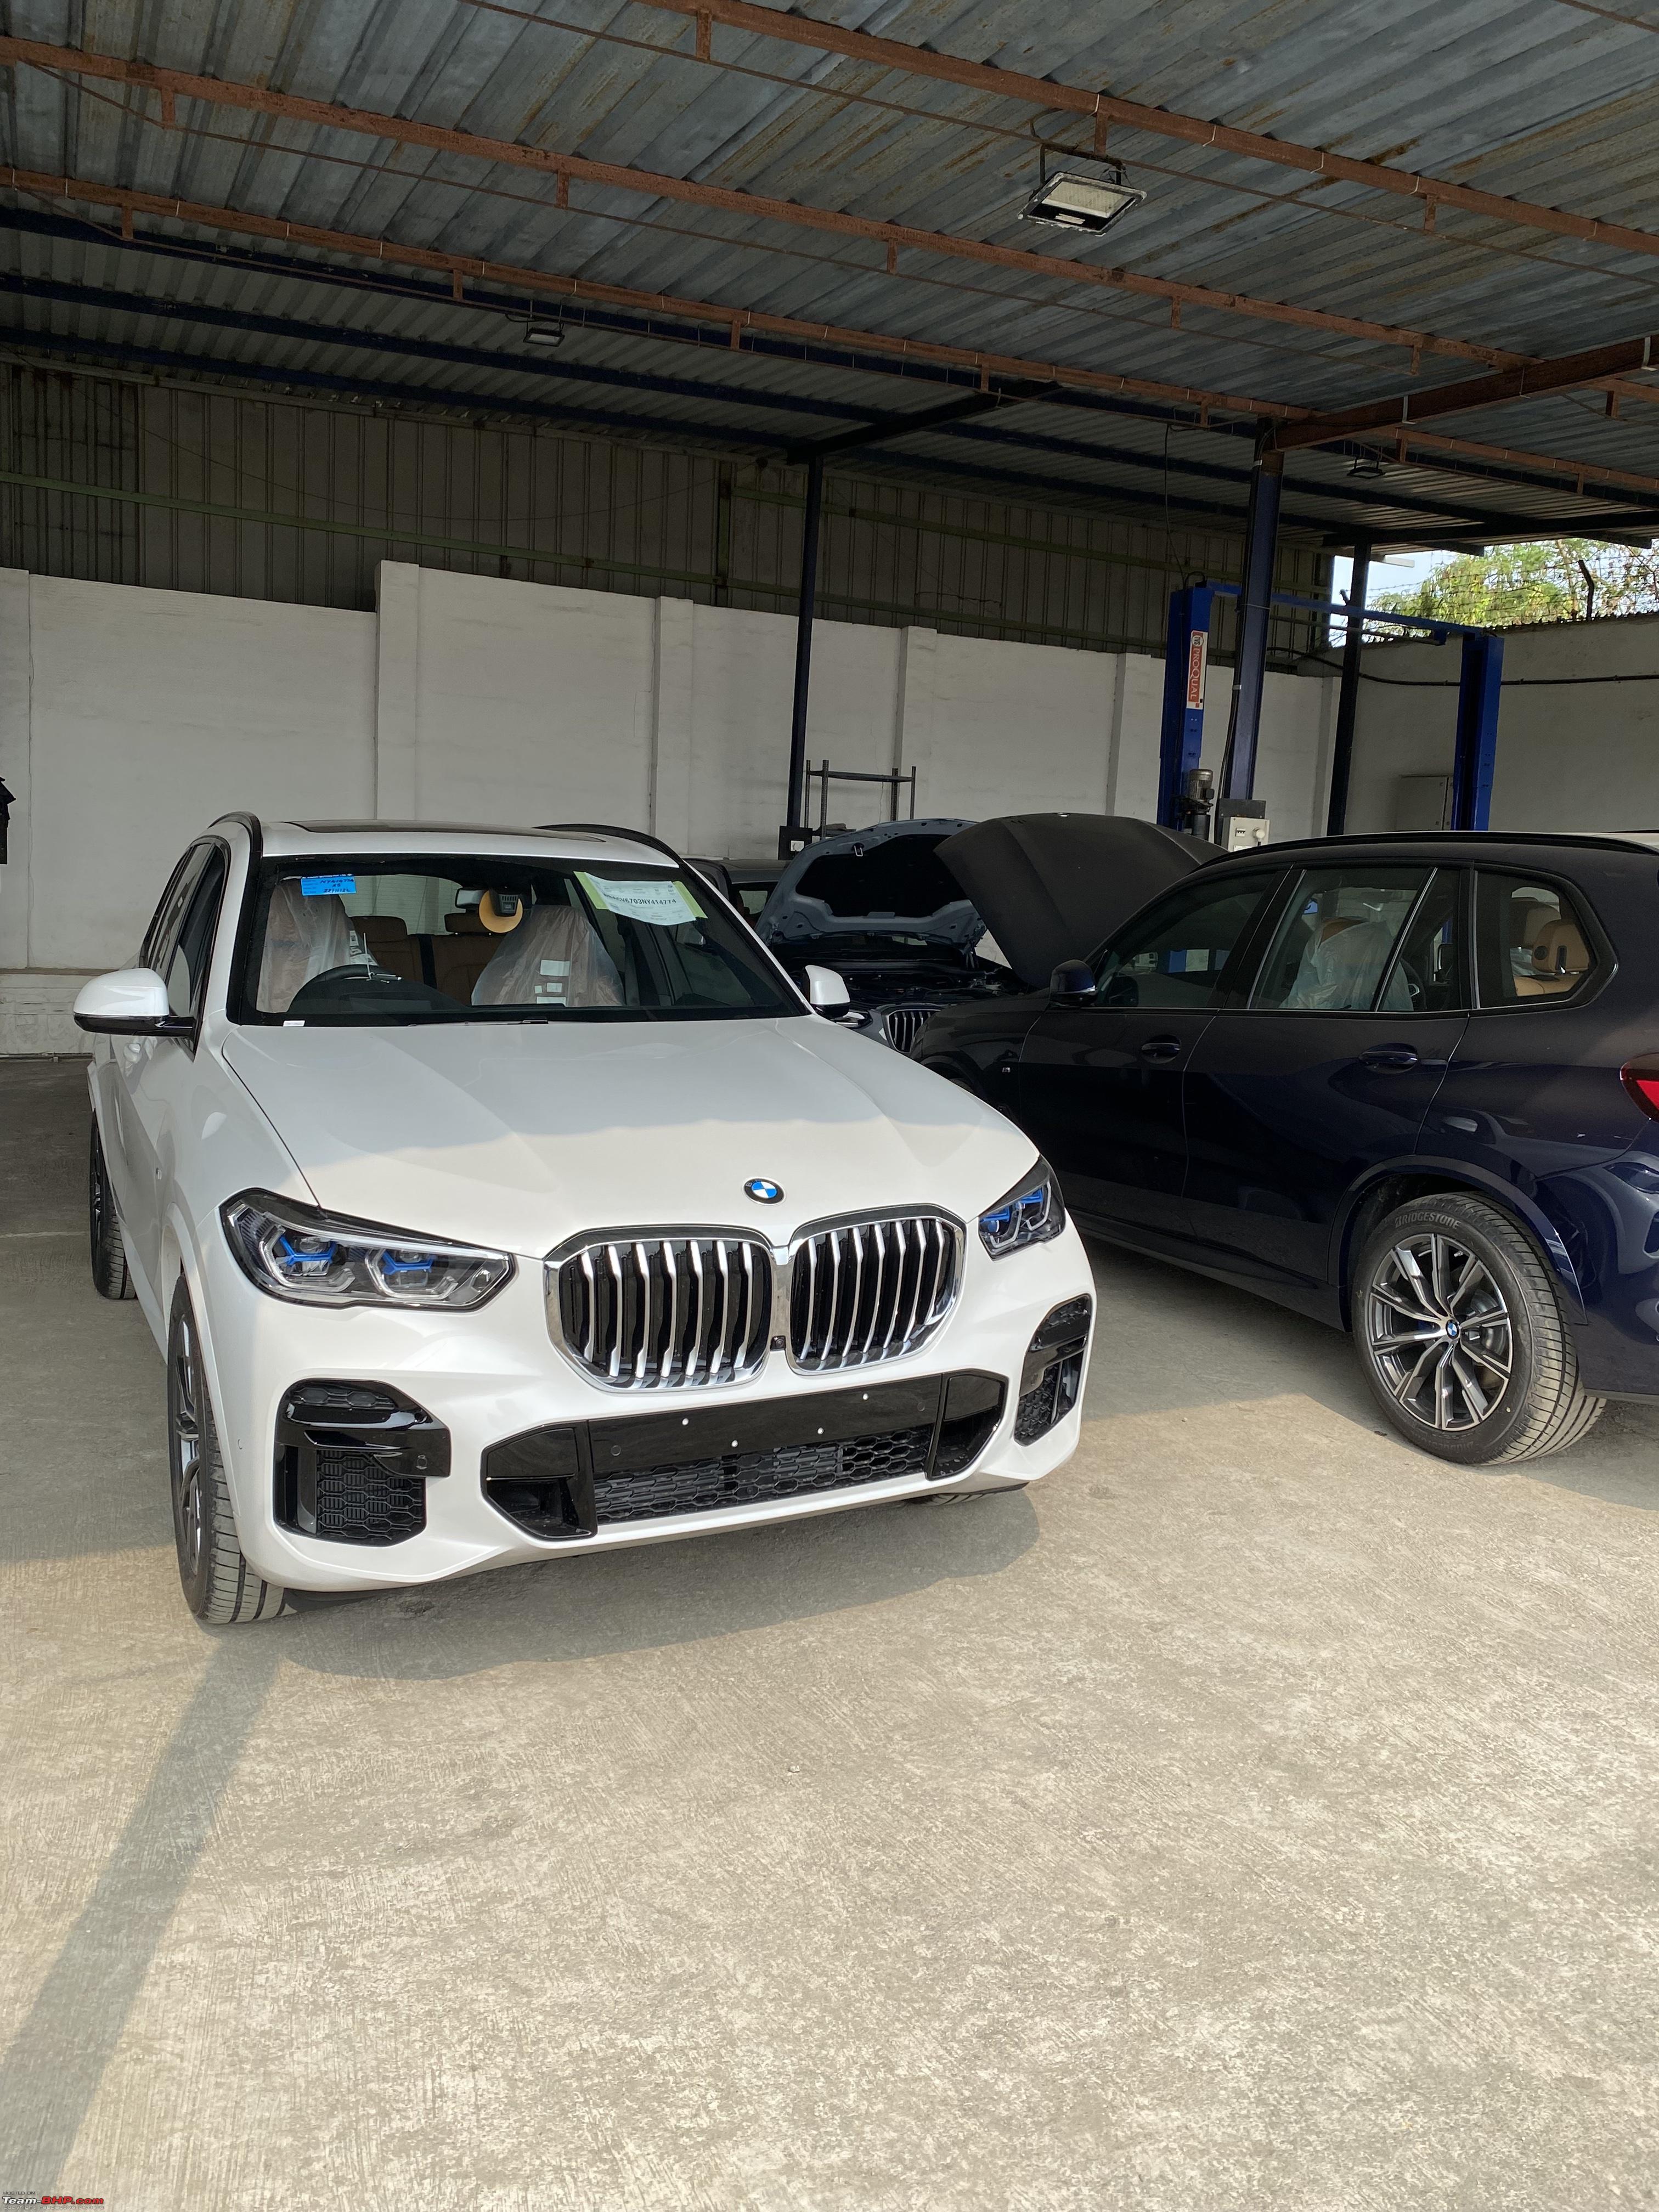 2019 BMW X5 (G05): This Is It, First Official Photos